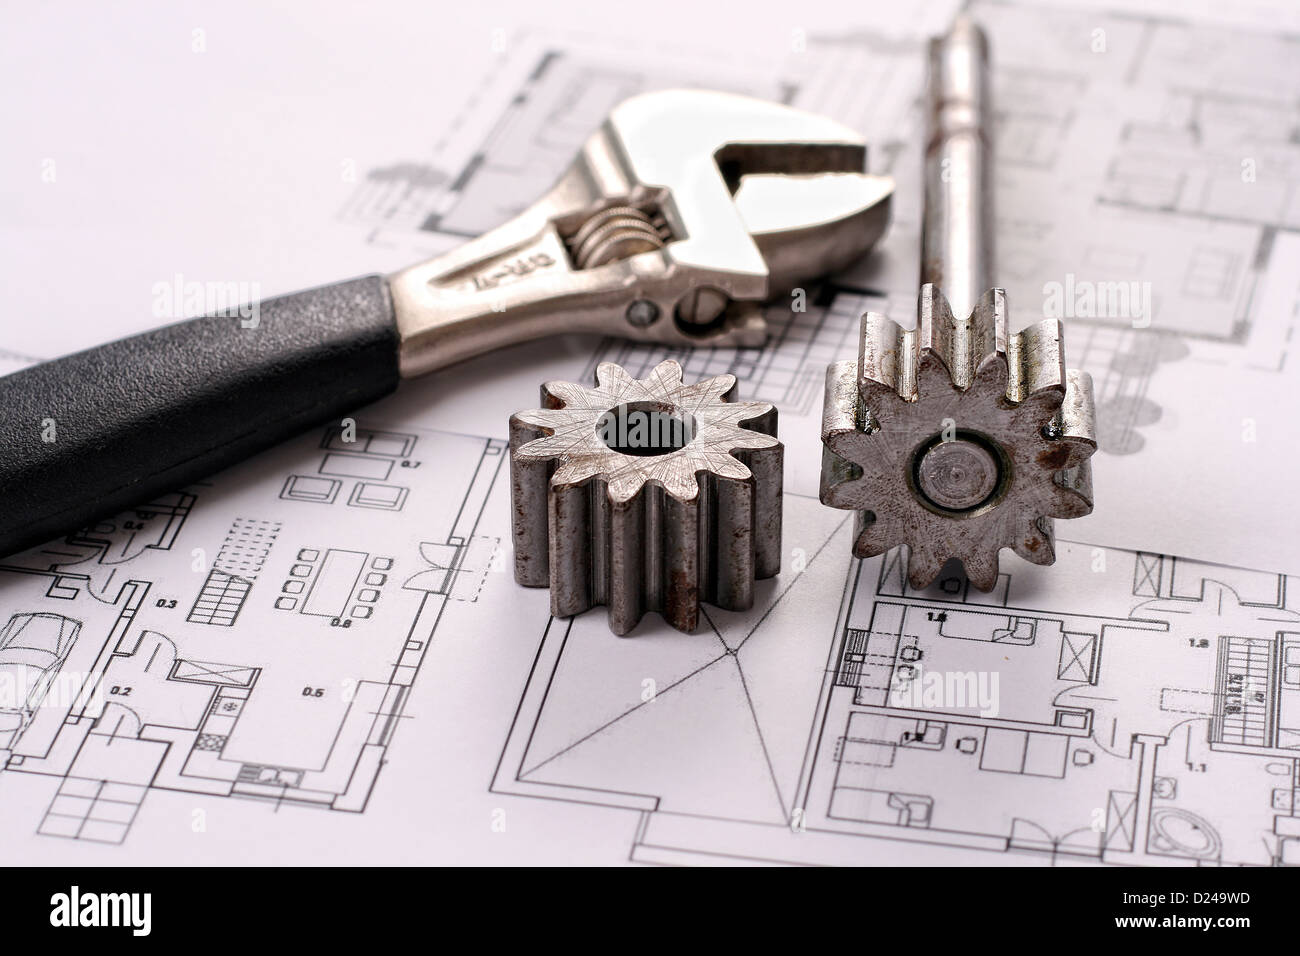 Tools on Blueprints including sprocket stacks and monkey wrench. House plans printed on white paper. Stock Photo